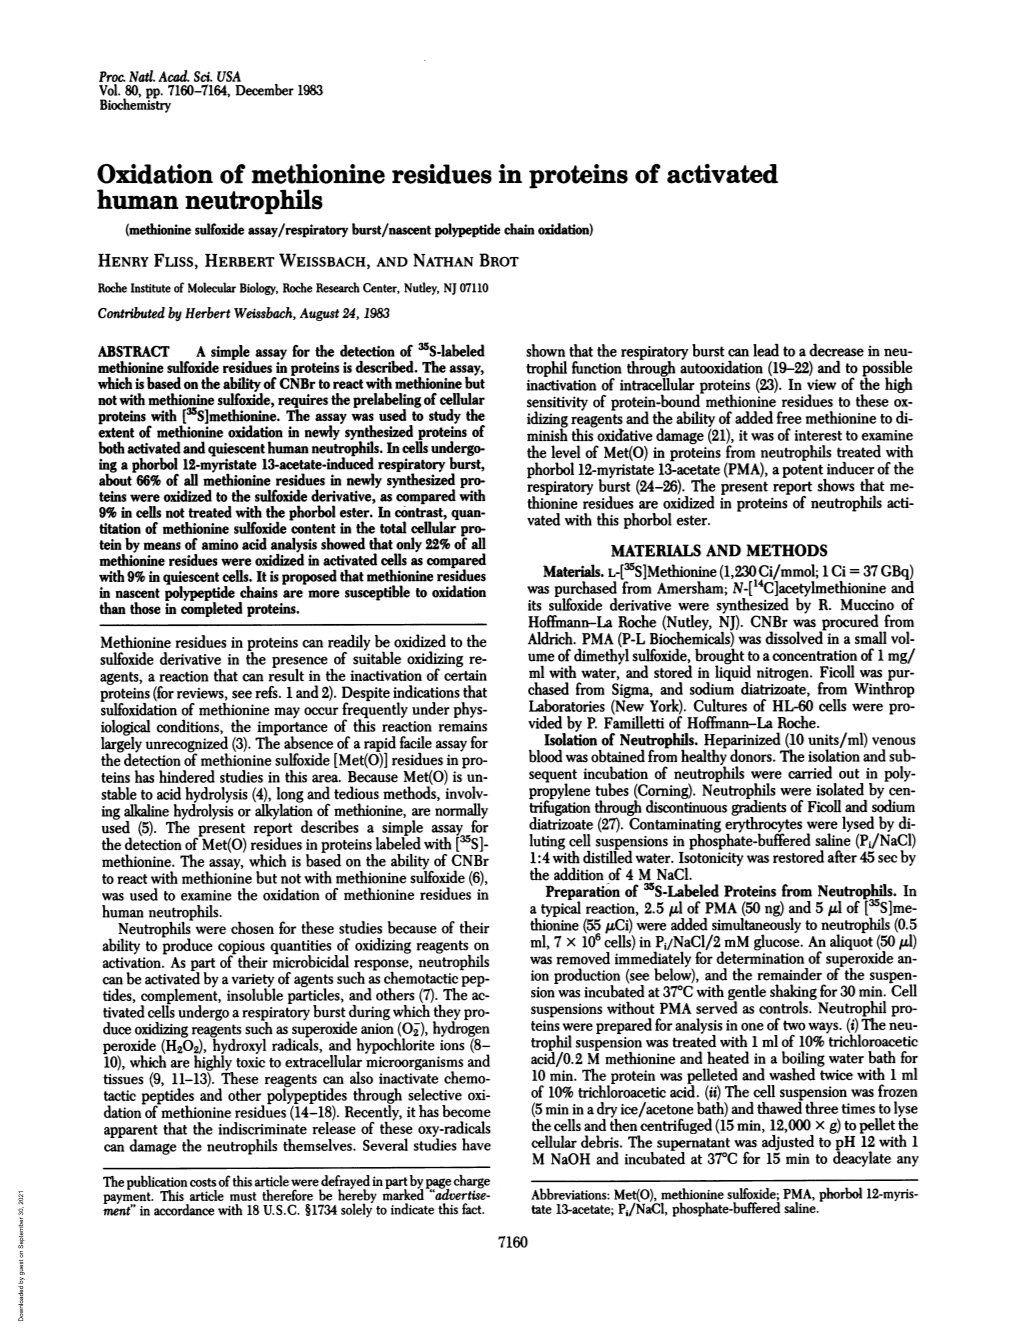 Oxidation of Methionine Residues in Proteins of Activated Human